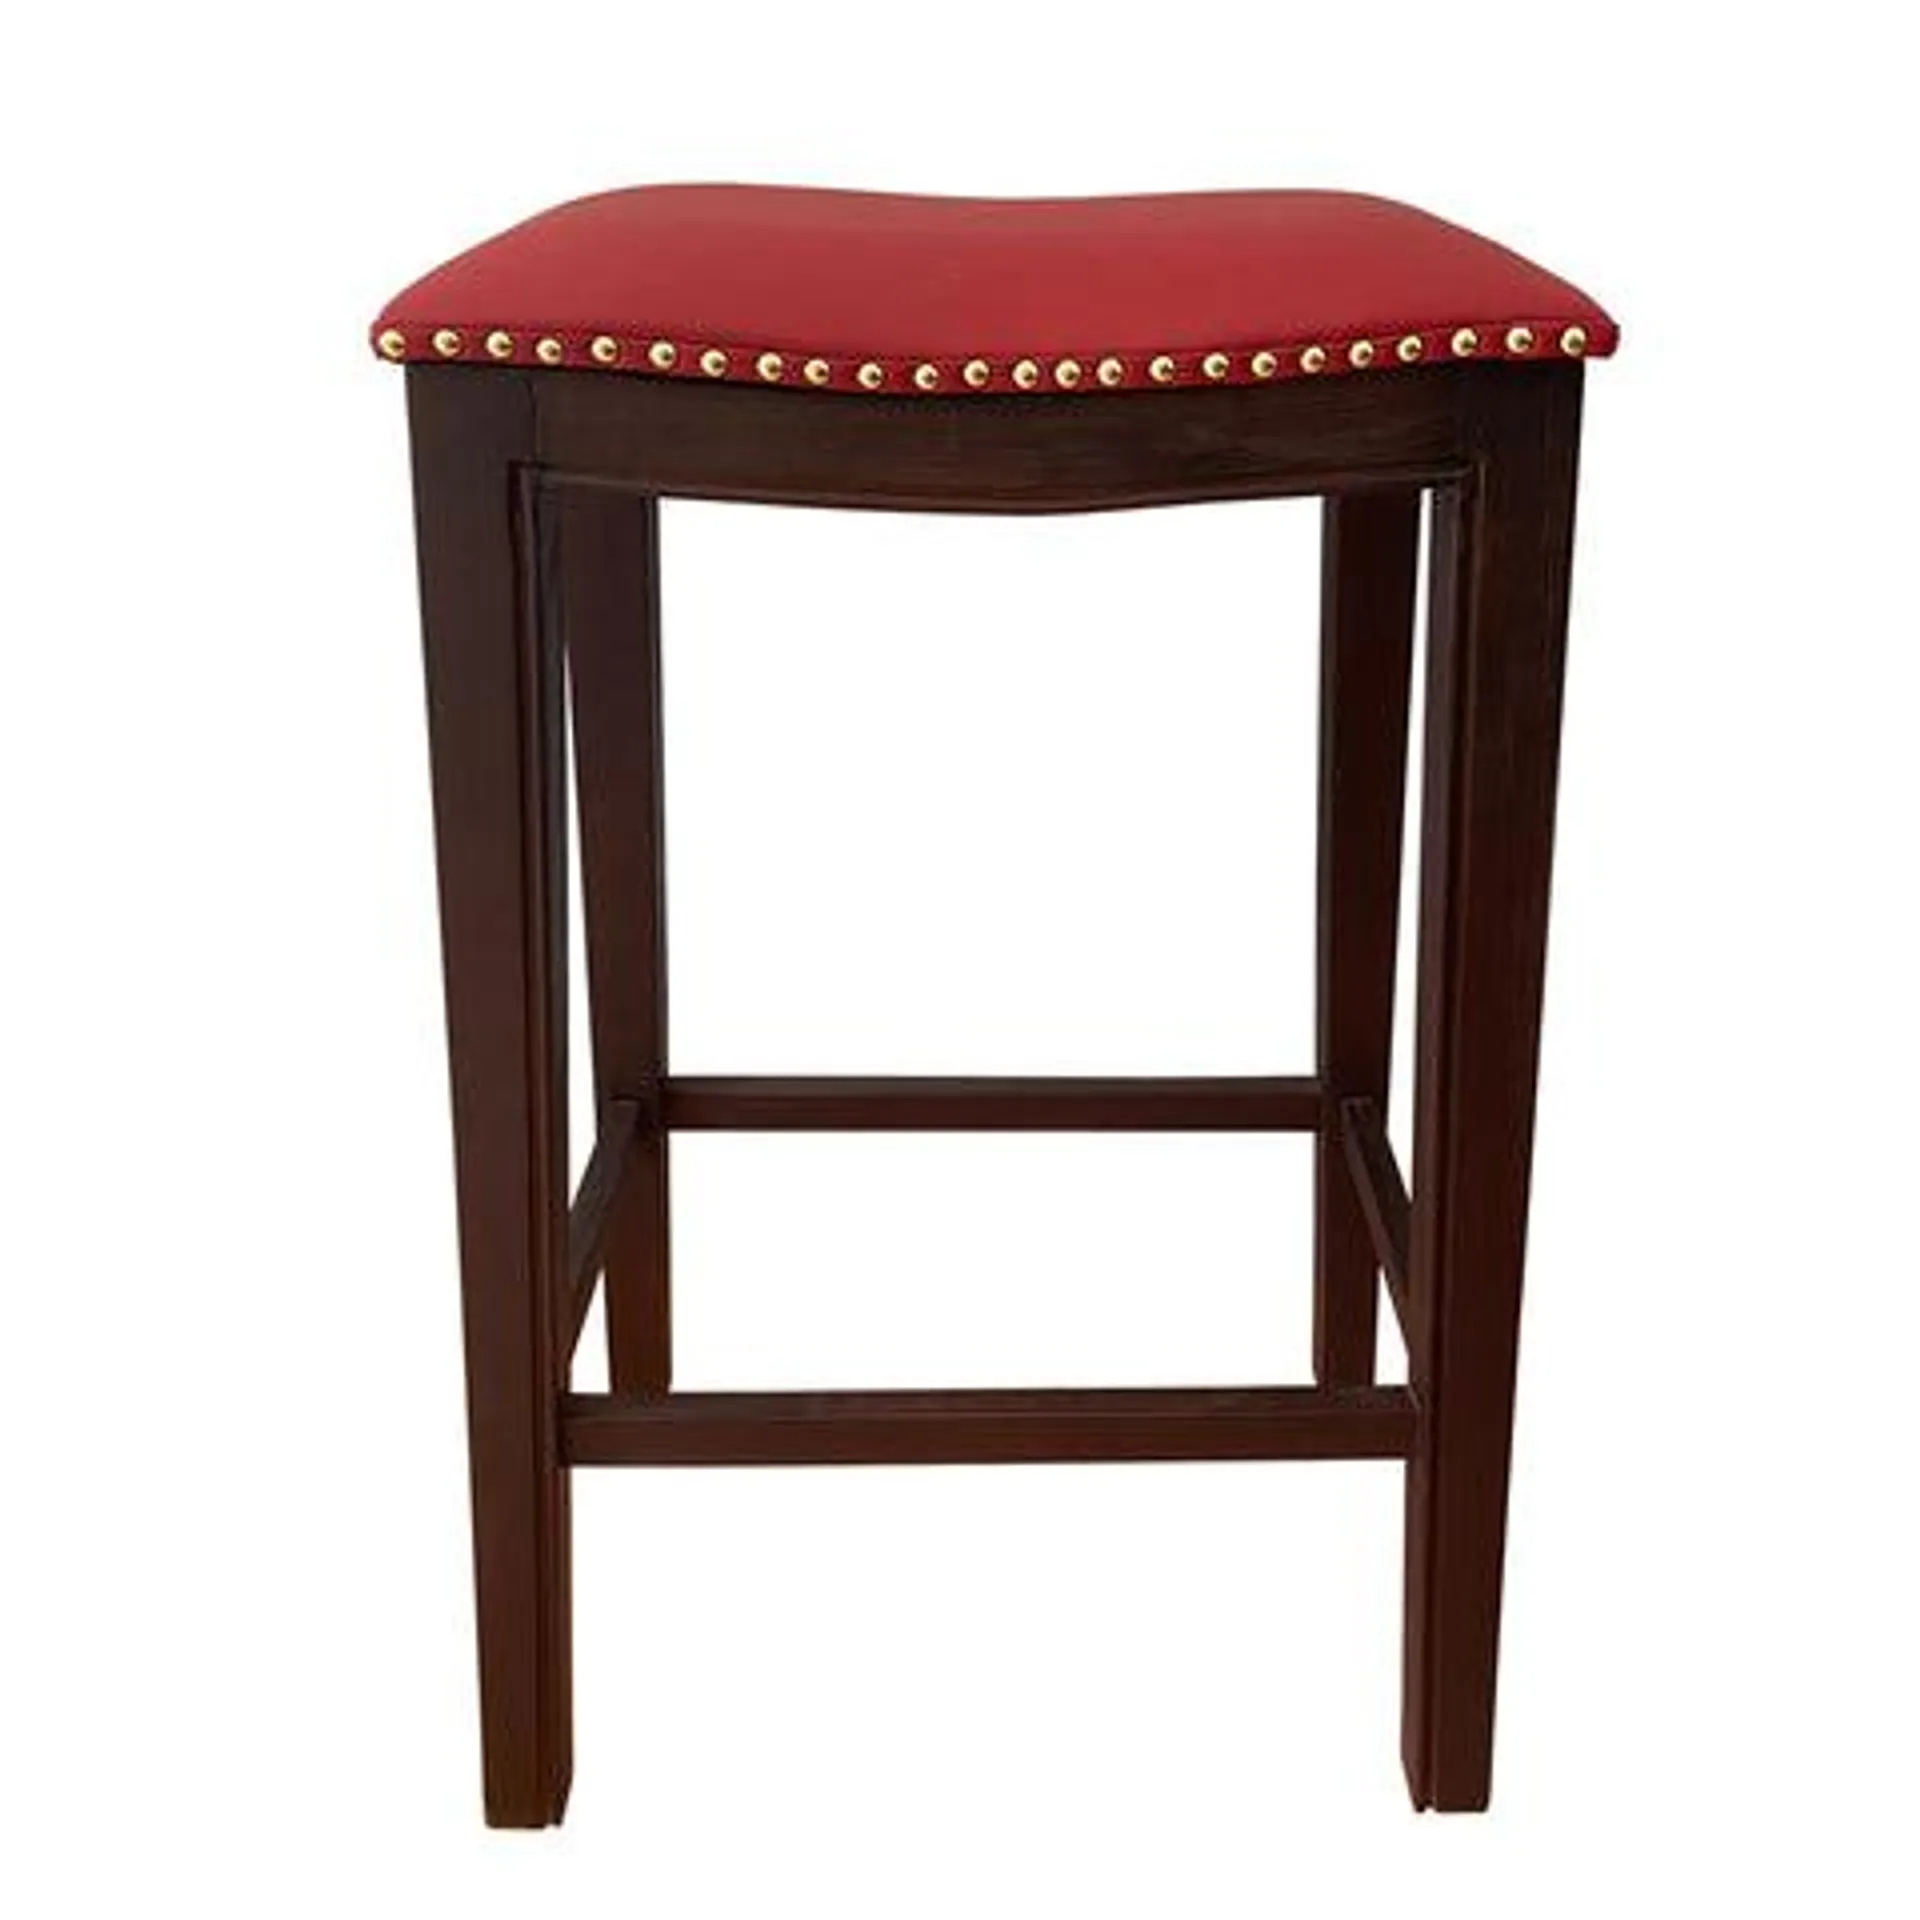 Ladd Red Stools